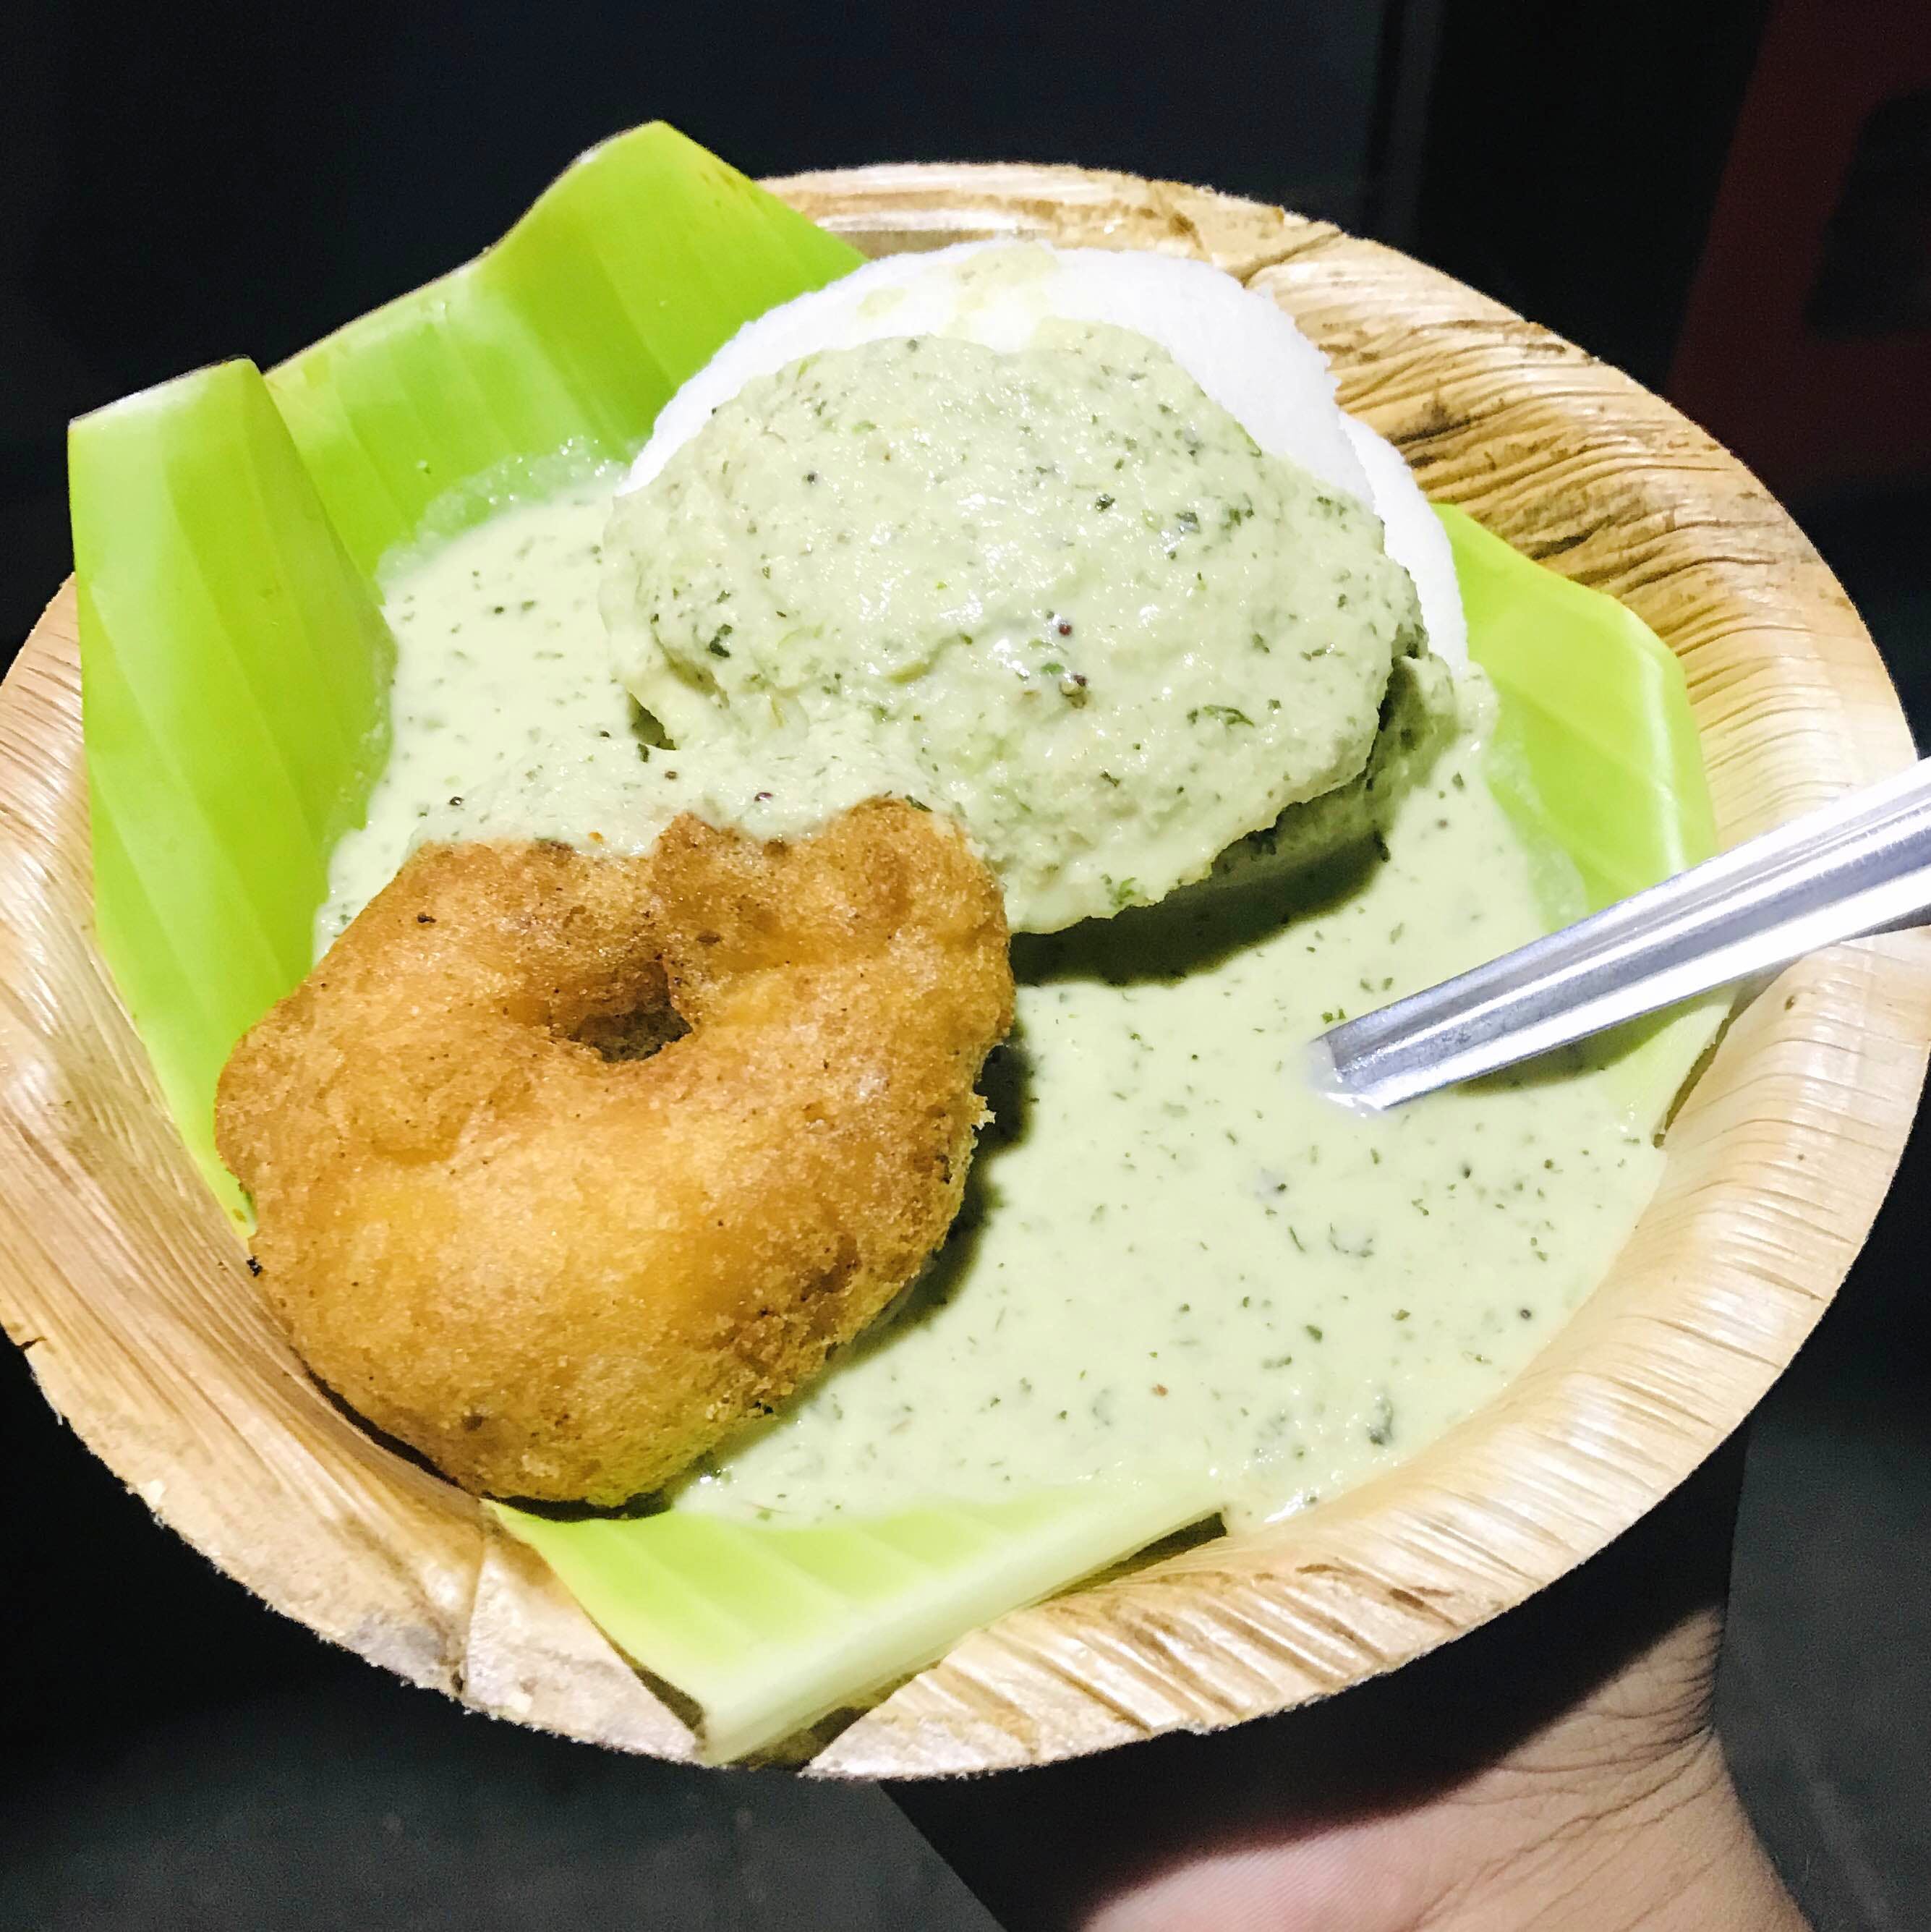 Veena Stores: A MUST-VISIT PLACE for IDLI VADA